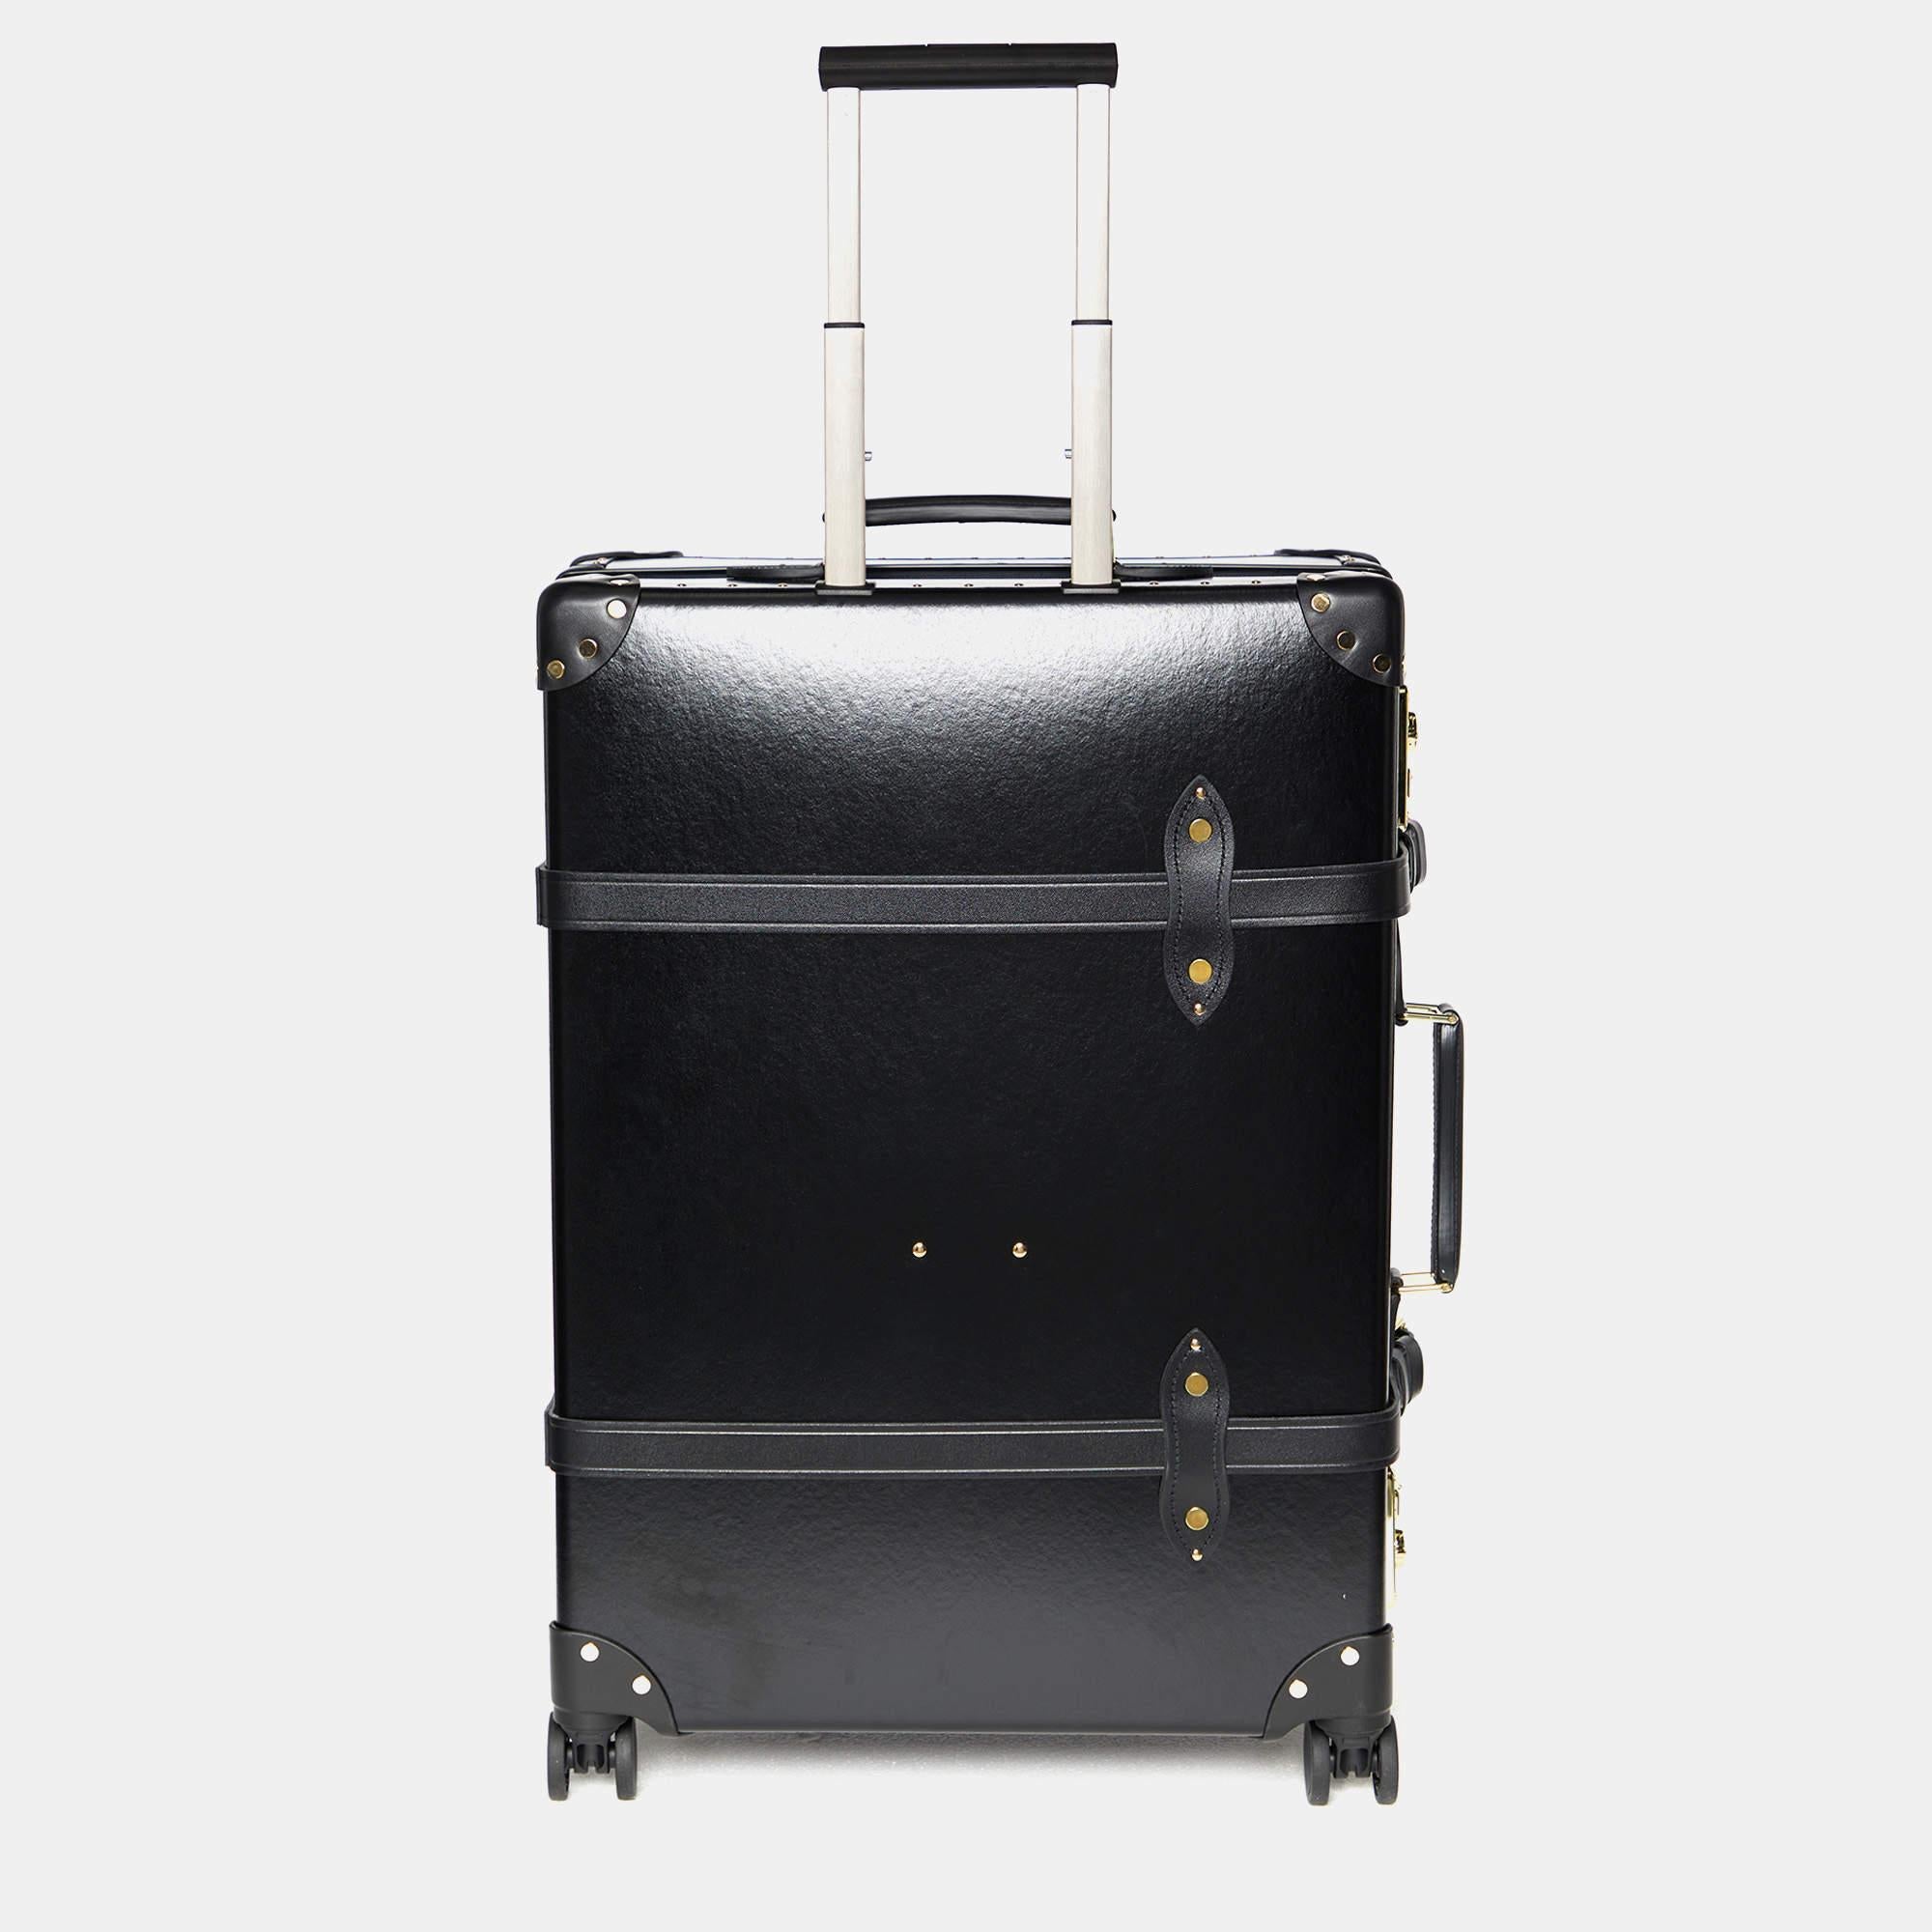 Globe-Trotter calls it 'an essential companion' for your travels. The Centenary luggage case is made of vulcanized fibreboard and the body is aided by leather and gold-tone hardware. It has a structured shape with leather handles, a telescopic cane,